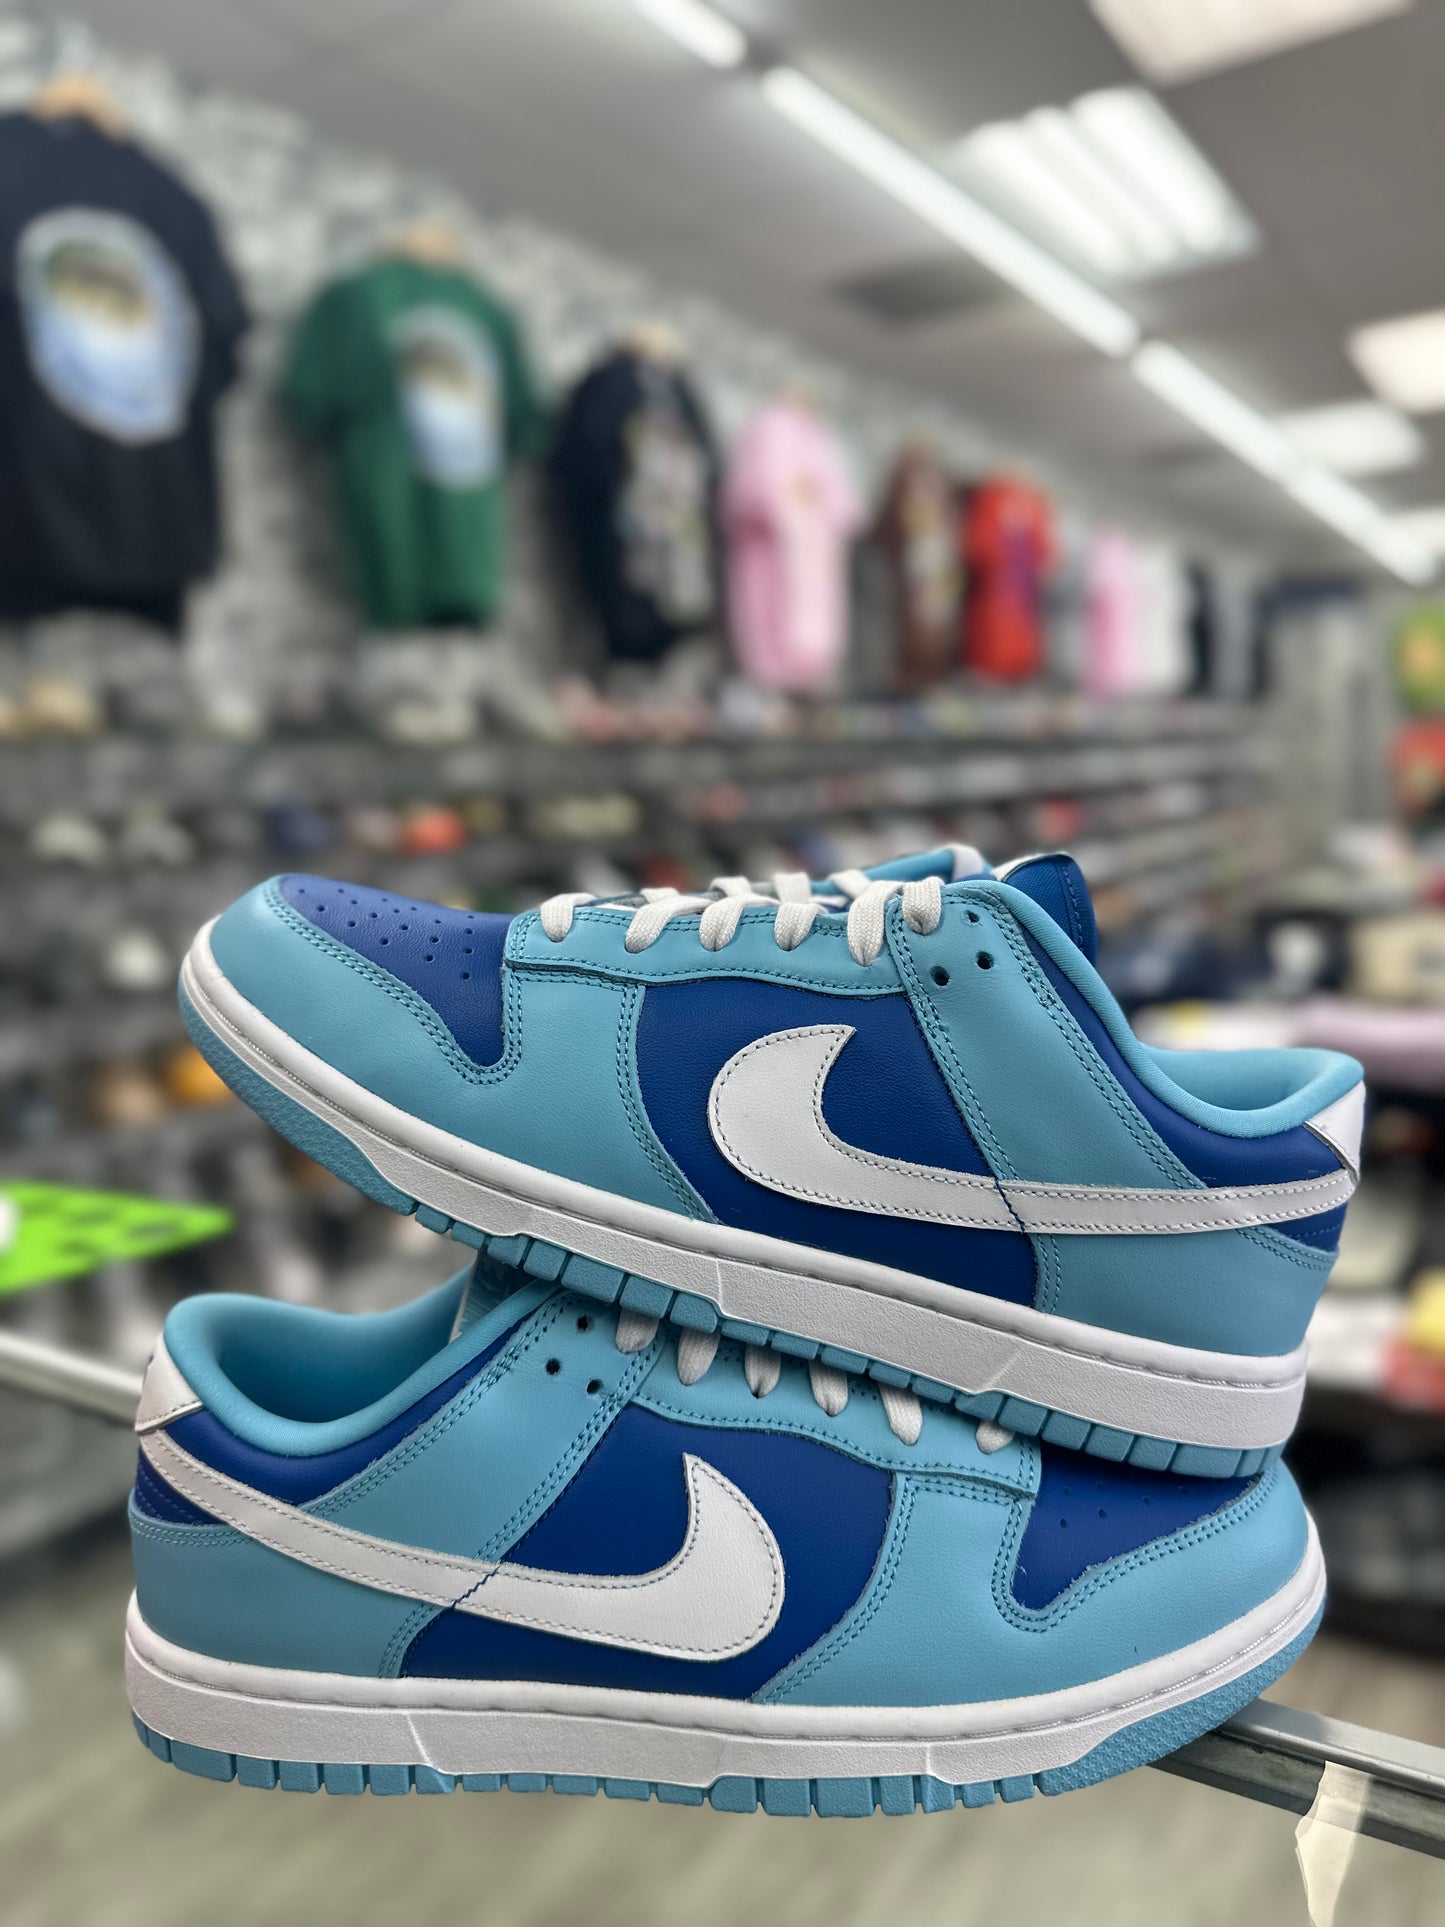 Nike Dunk Low “Blue Chill”